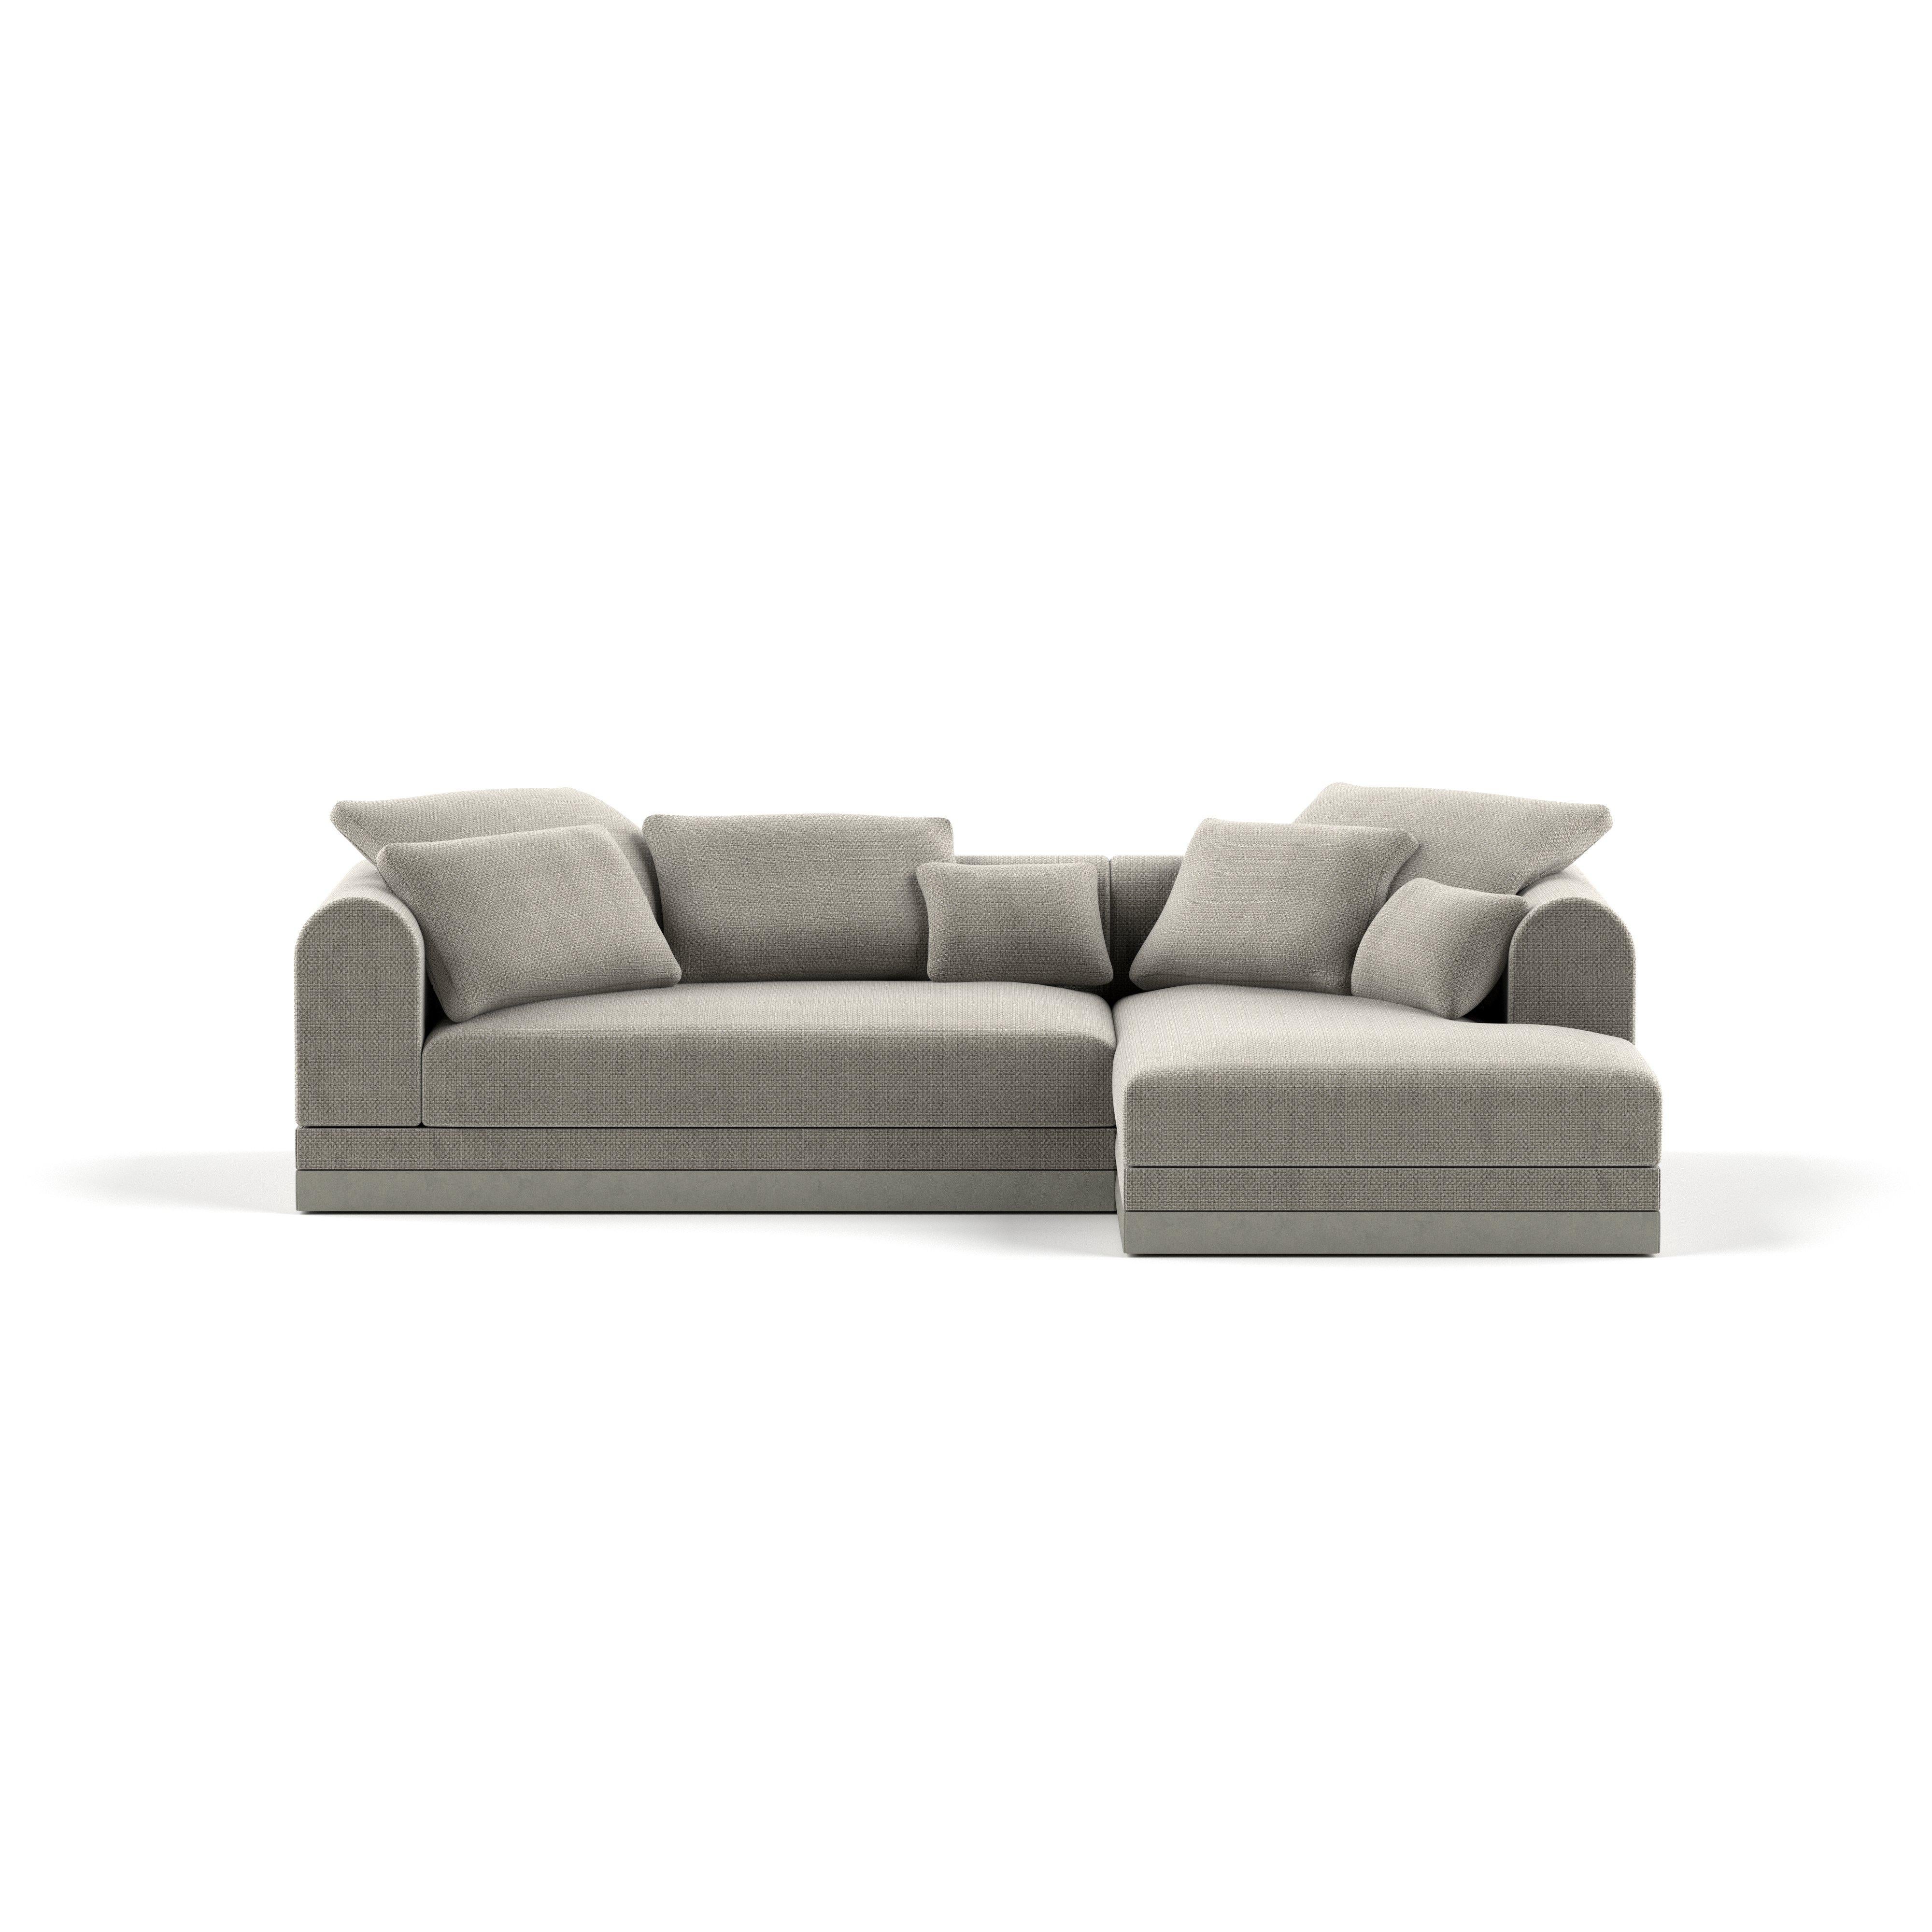 'Aqueduct' Contemporary Sofa by Poiat, Setup 1, Yang 95, Low Plinth For Sale 3